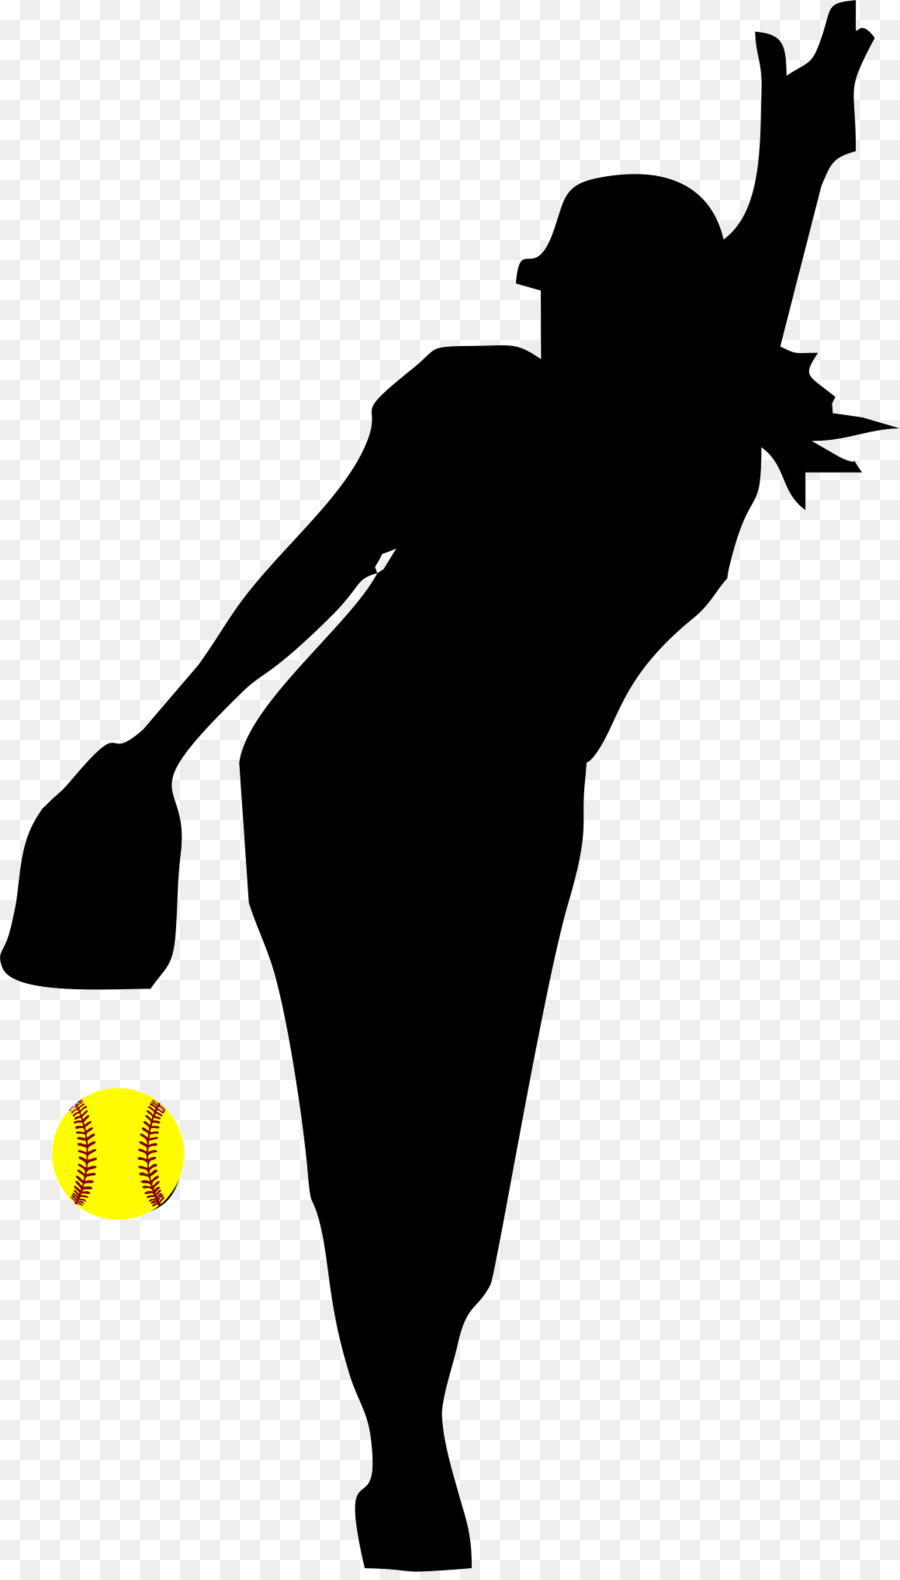 Softball: Pitching Fastpitch softball Clip art - badminton players silhouette png download - 1160*2026 - Free Transparent Softball Pitching png Download.